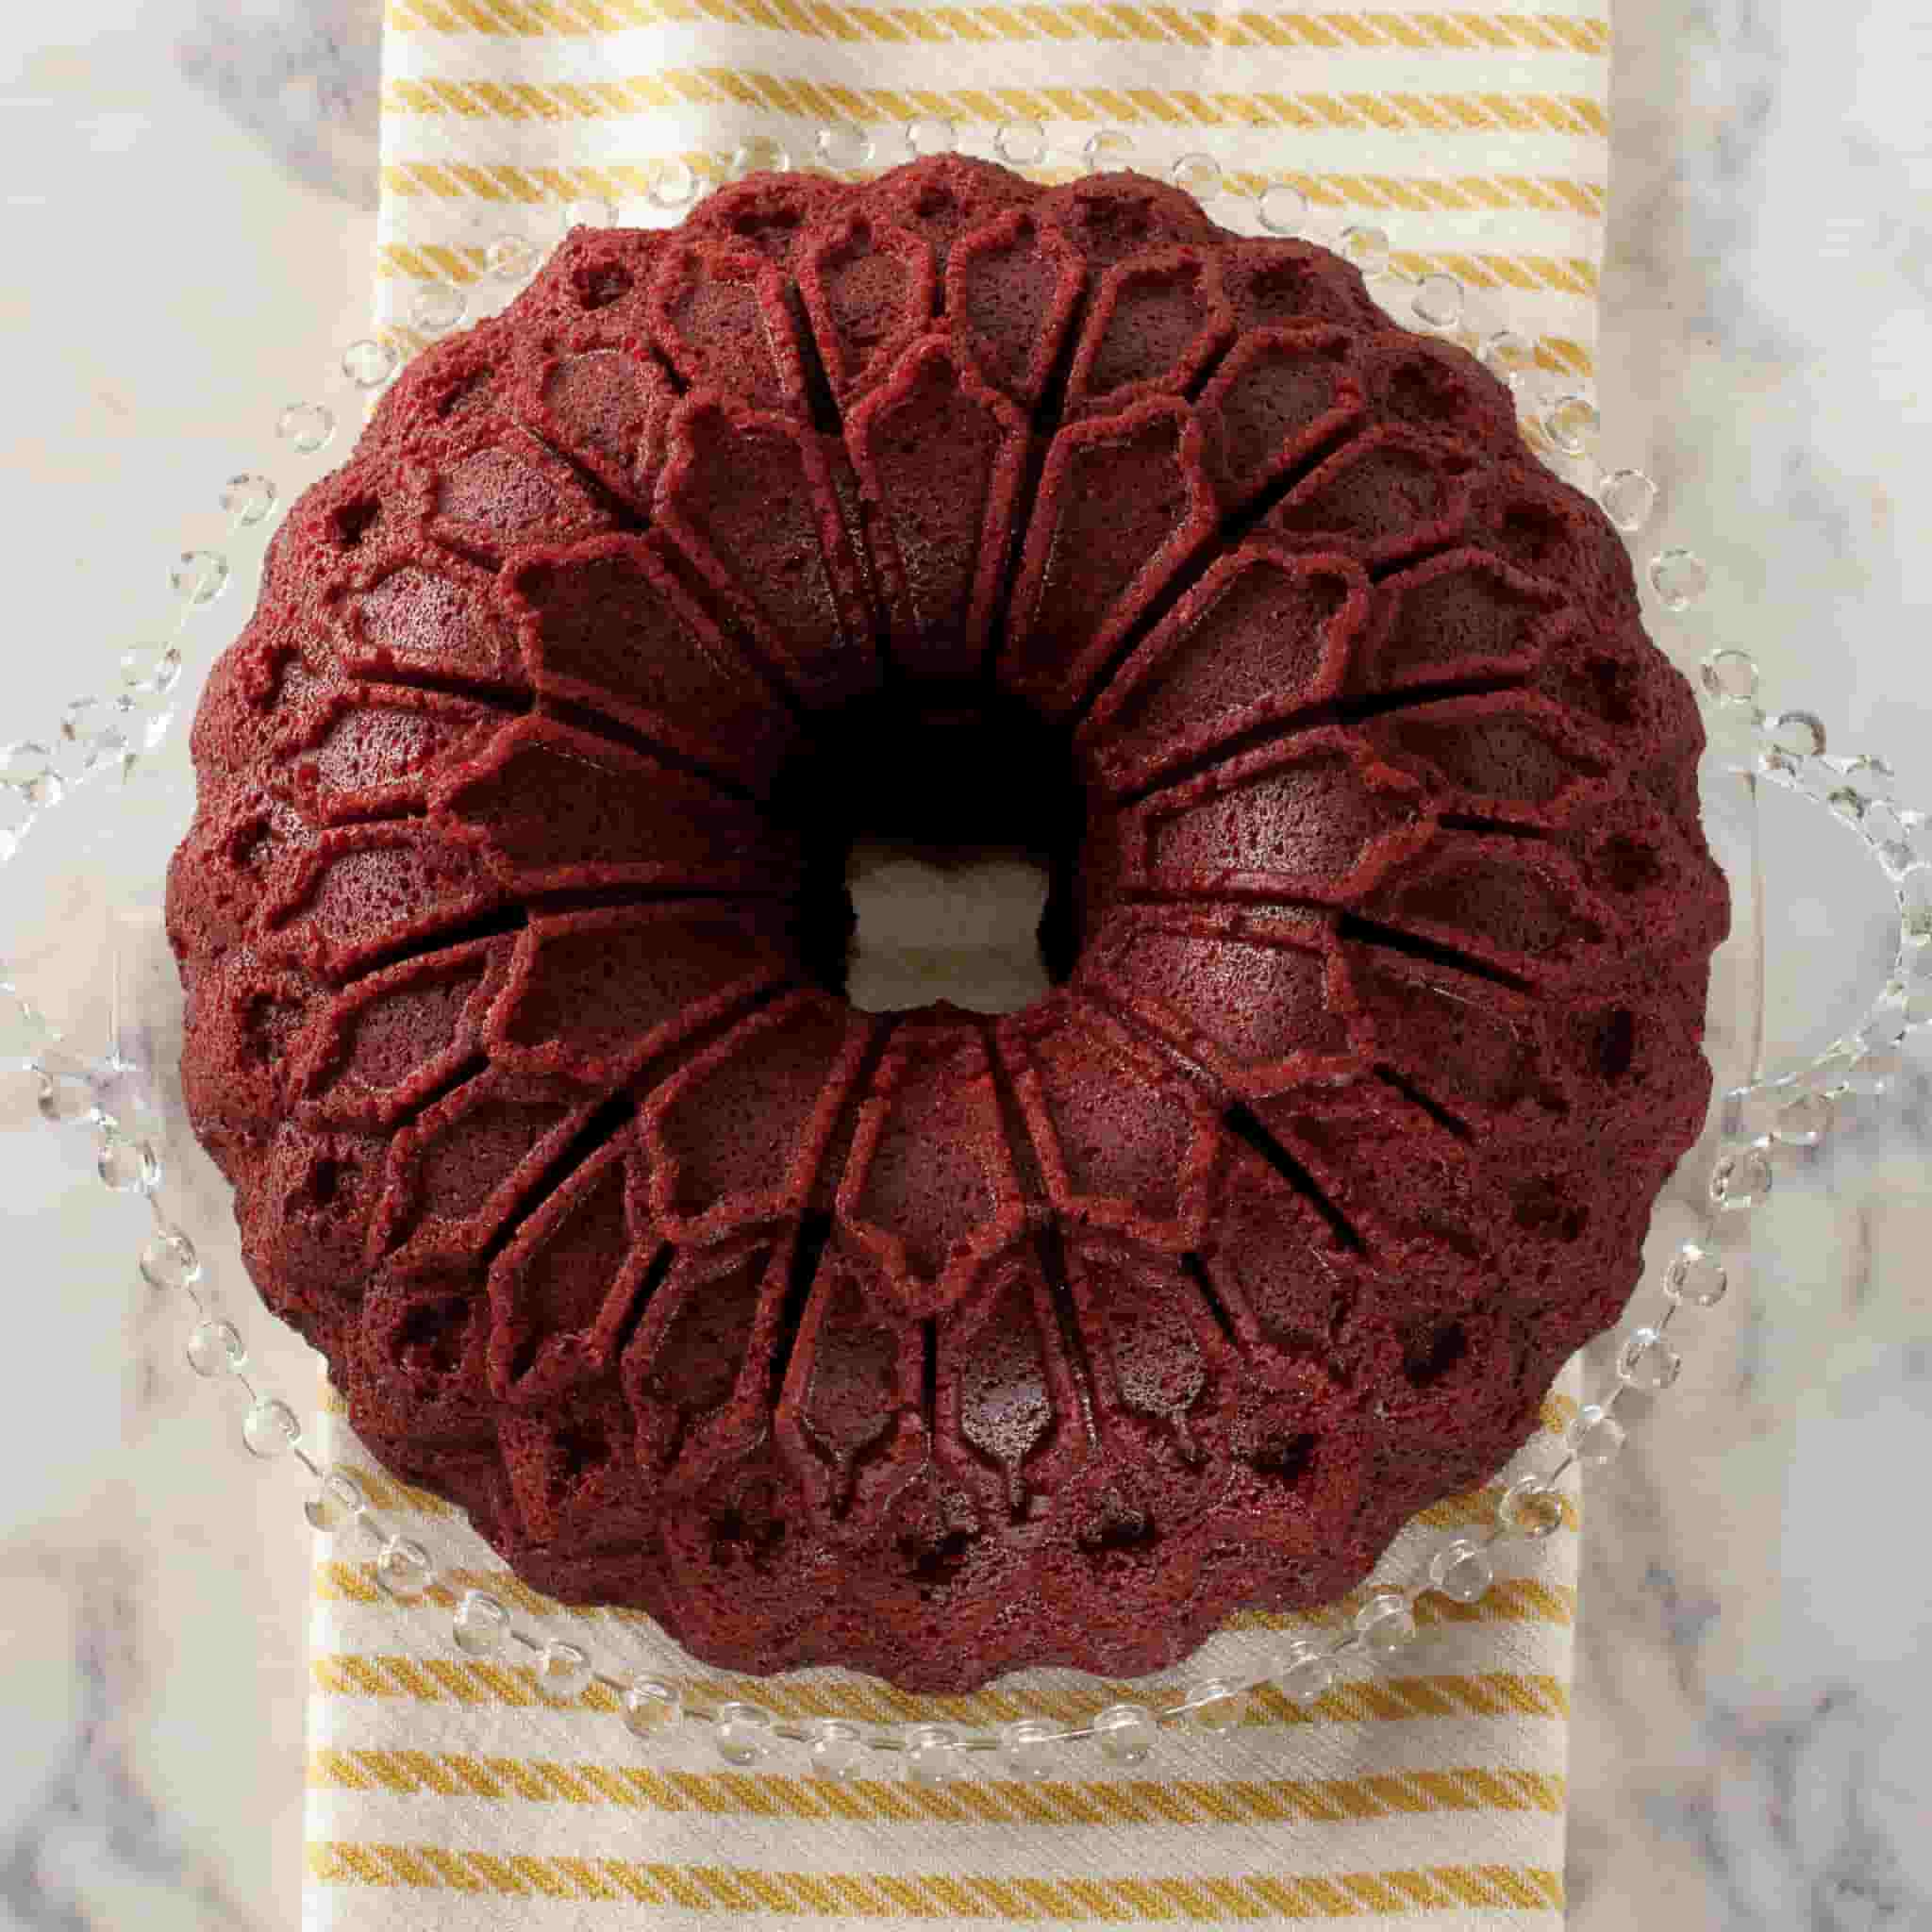 Nordicware Stained Glass Bundt Pan, 2.1L